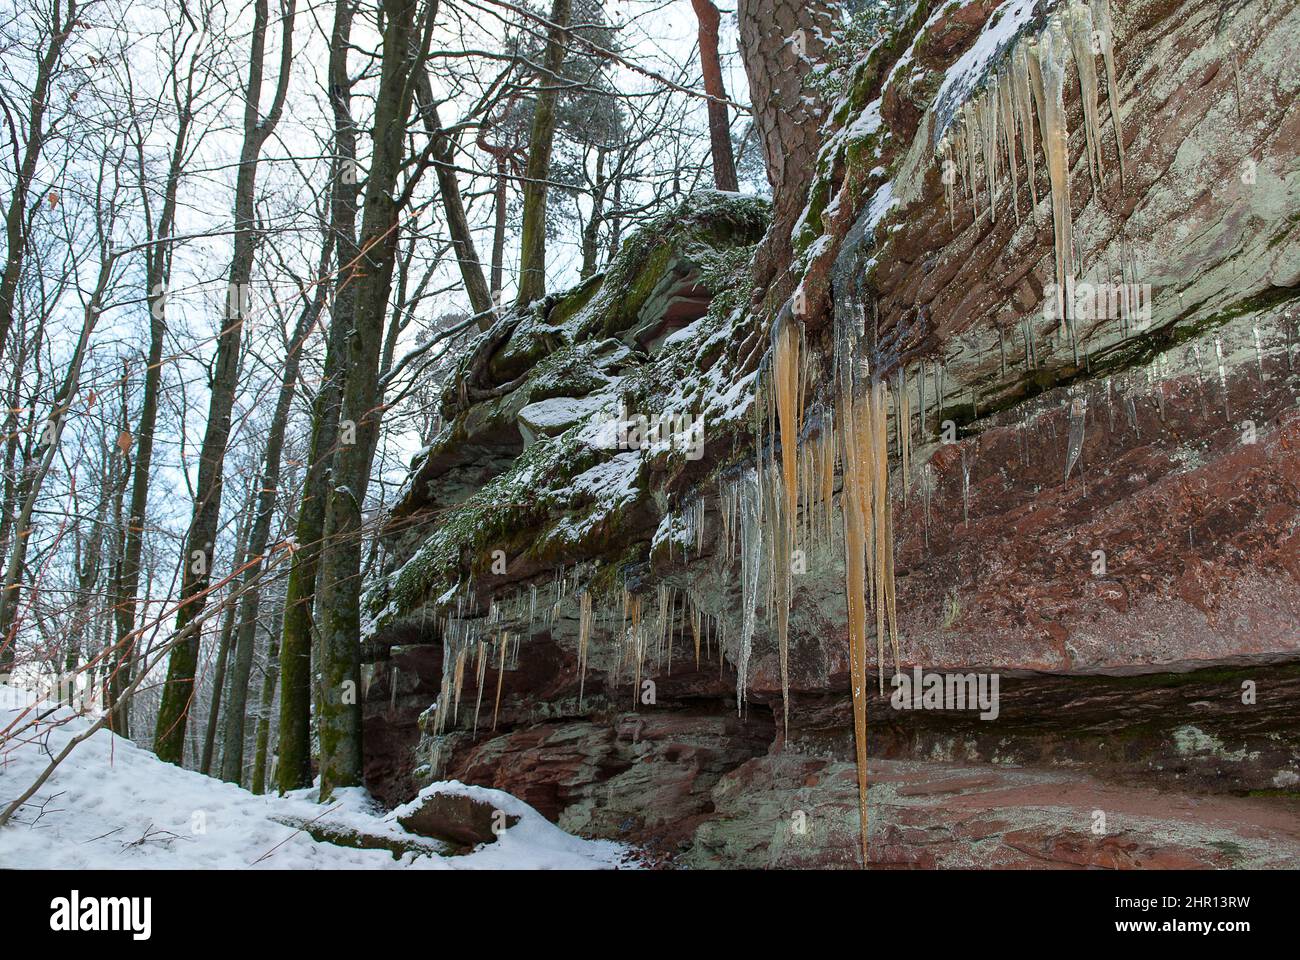 Sandstone rocks of the Northern Vosges with ice stalactites, Vosges du Nord Regional Nature Park, France Stock Photo